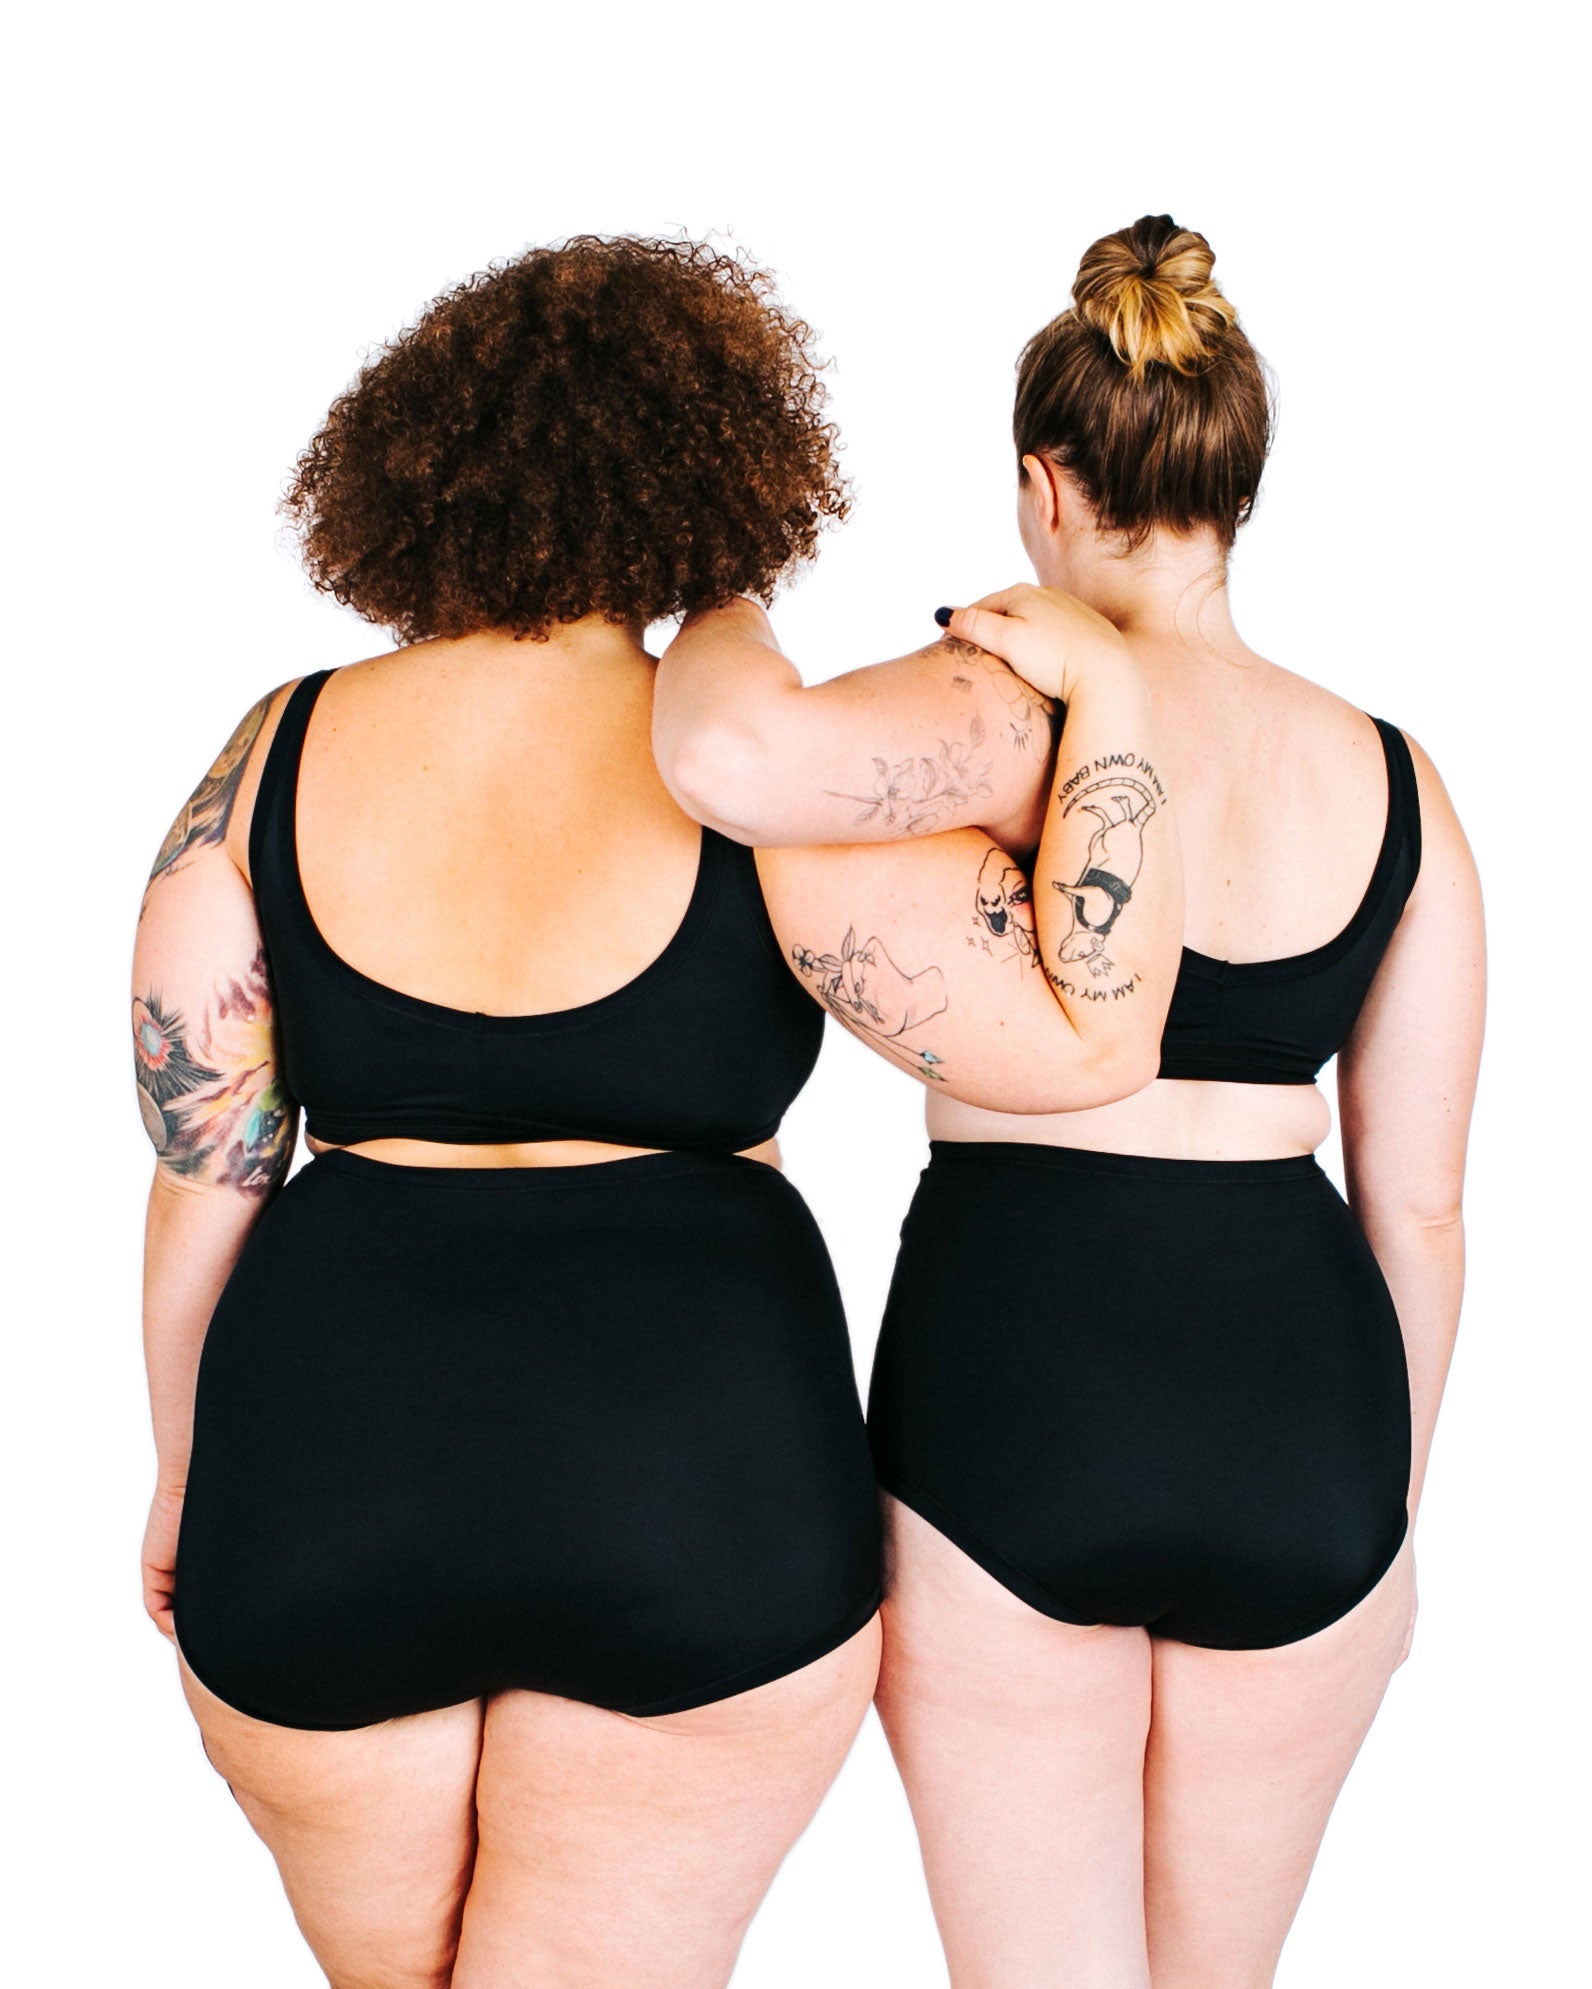 Fit photo from the back of Thunderpants recycled nylon Swimwear Sky Rise style bottoms and Swimwear Top in Plain Black on two models standing together.